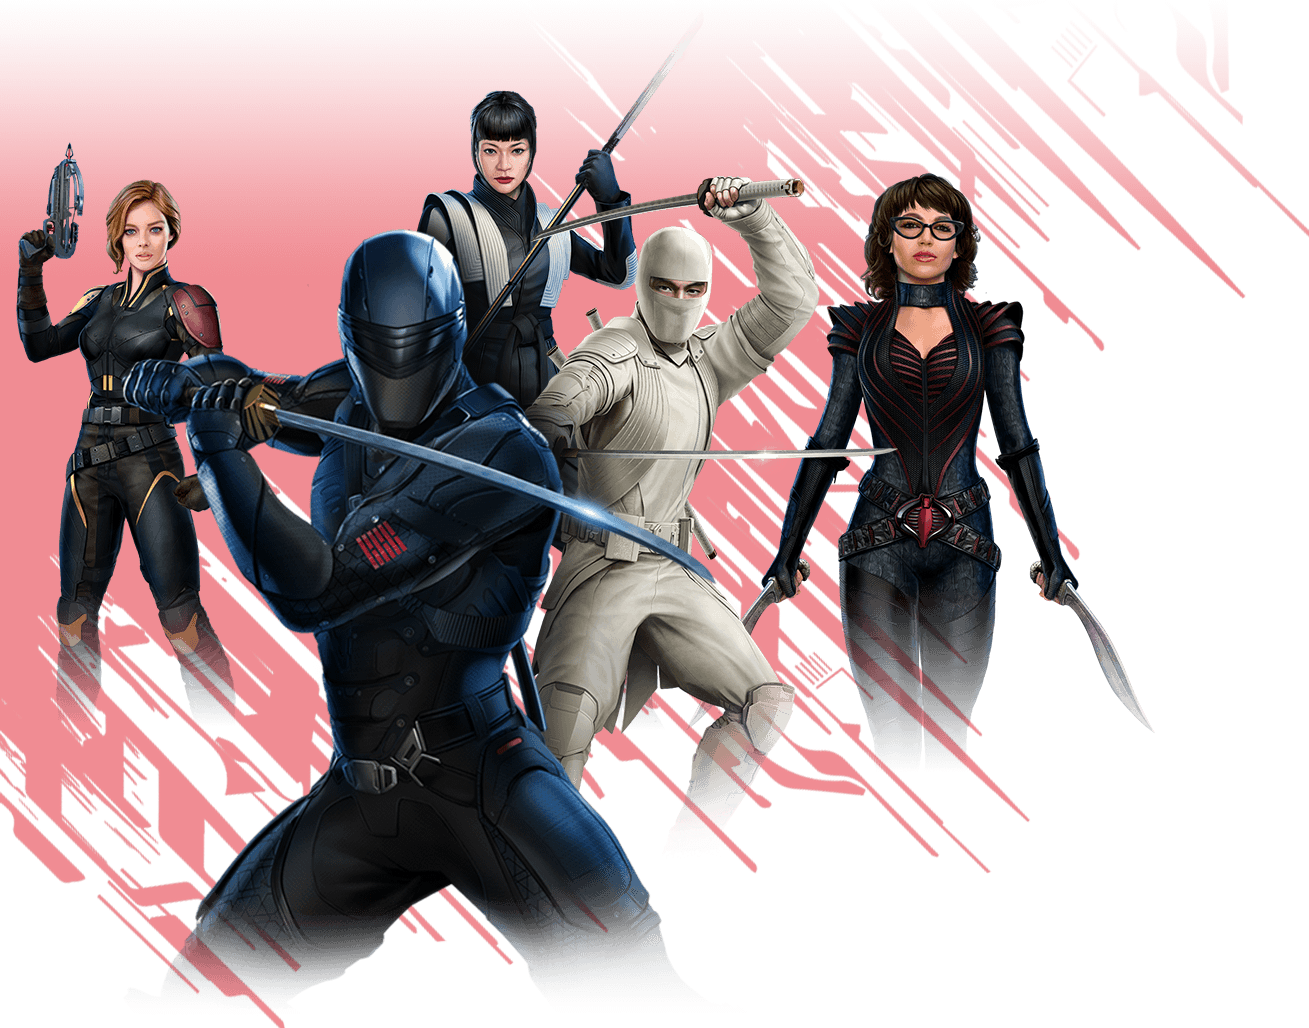 G.I. JOE Official Site for G.I. JOE Movies, Characters, Comics, Games and Products